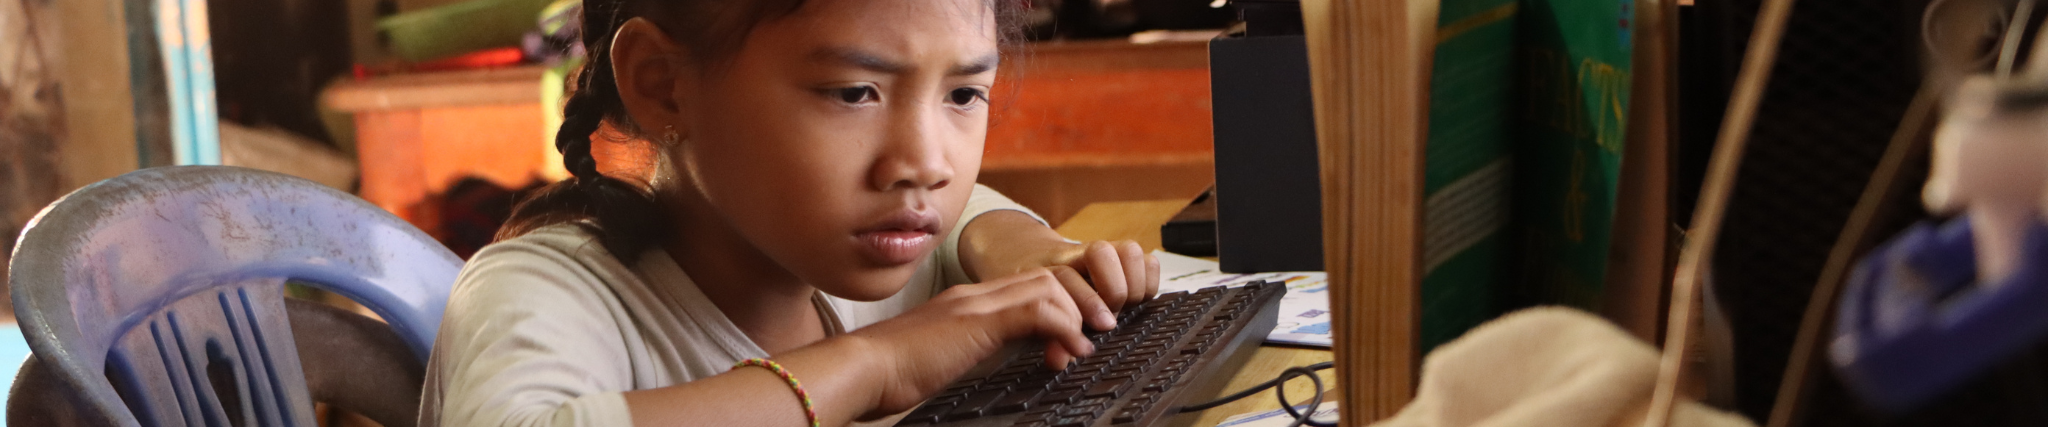 5 reasons your child should start coding